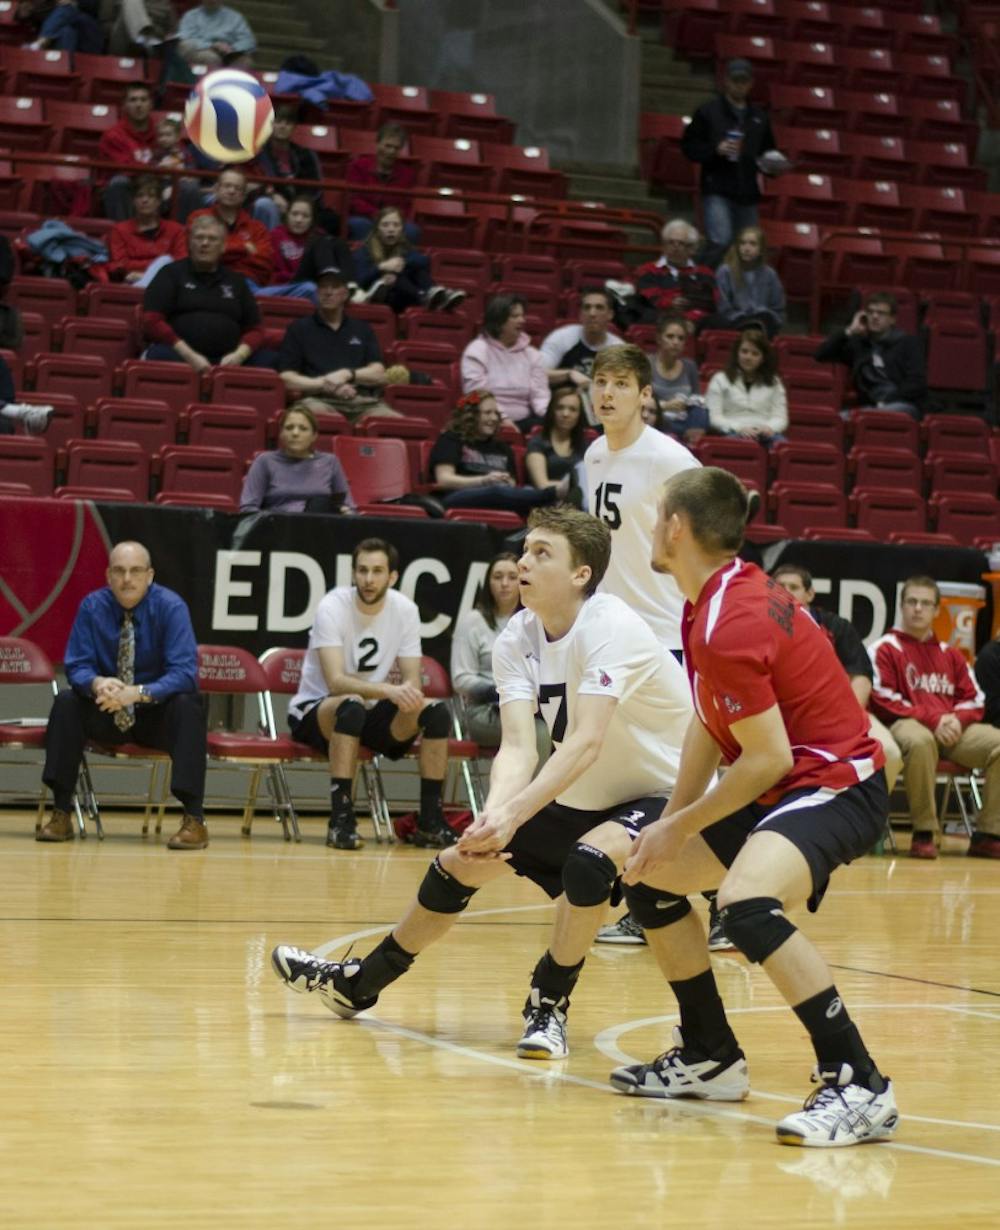 Junior outside attacker Shane Witmer bumps the ball during the first set against Ohio State on March 23 at Worthen Arena. Witmer had 10 digs. DN PHOTO BREANNA DAUGHERTY